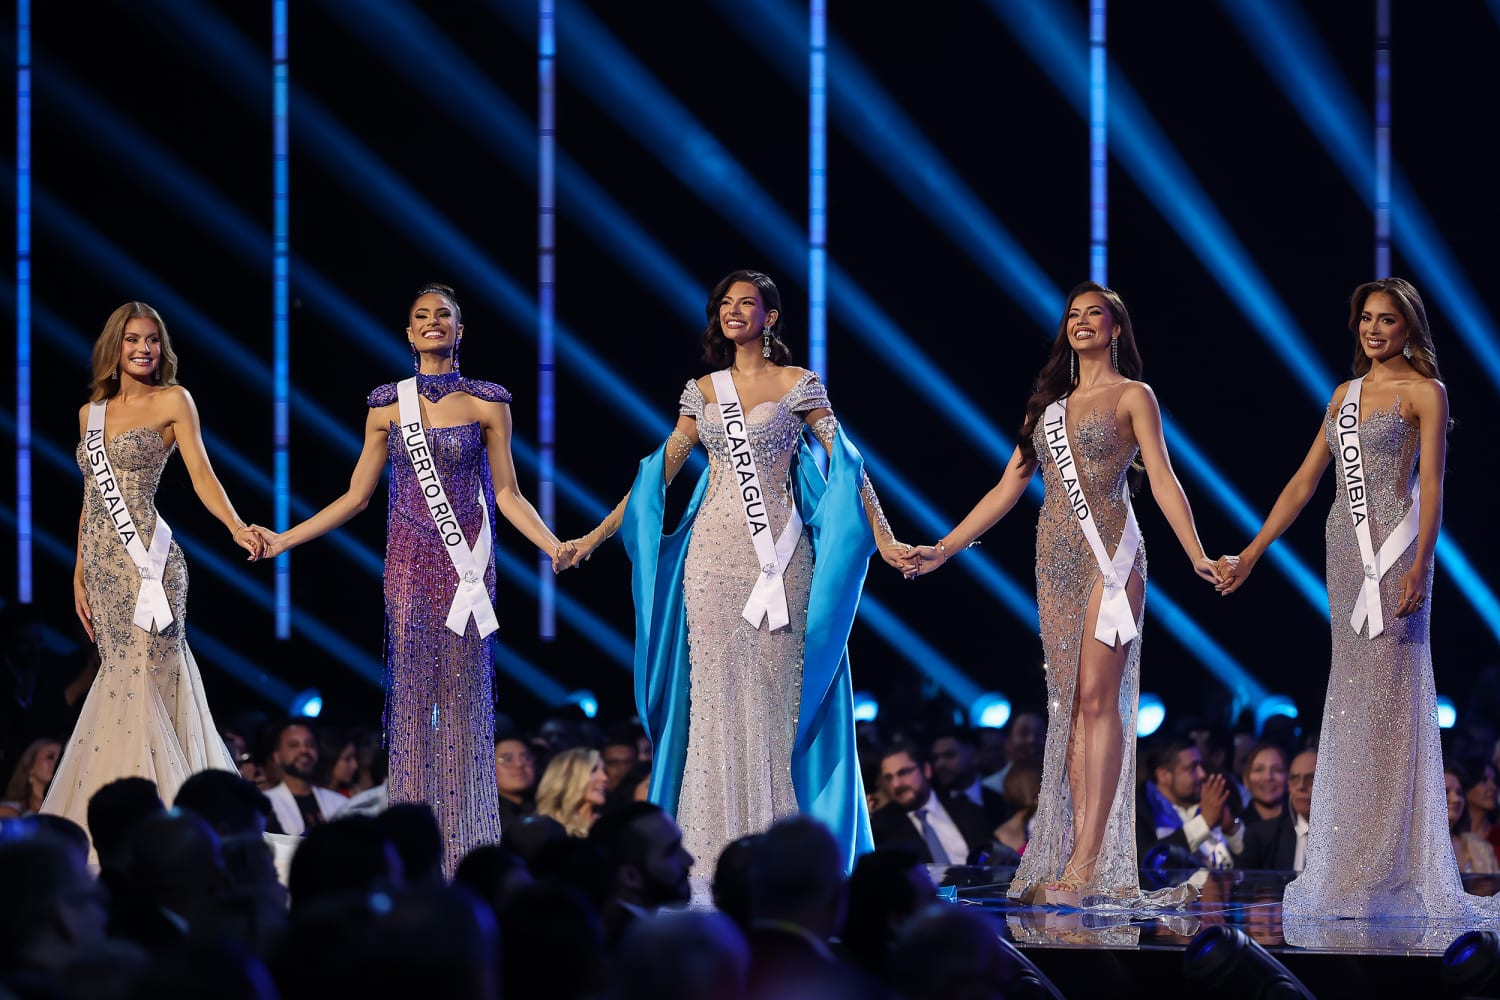 Miss Nicaragua wins Miss Universe 2023 at pageant full of firsts